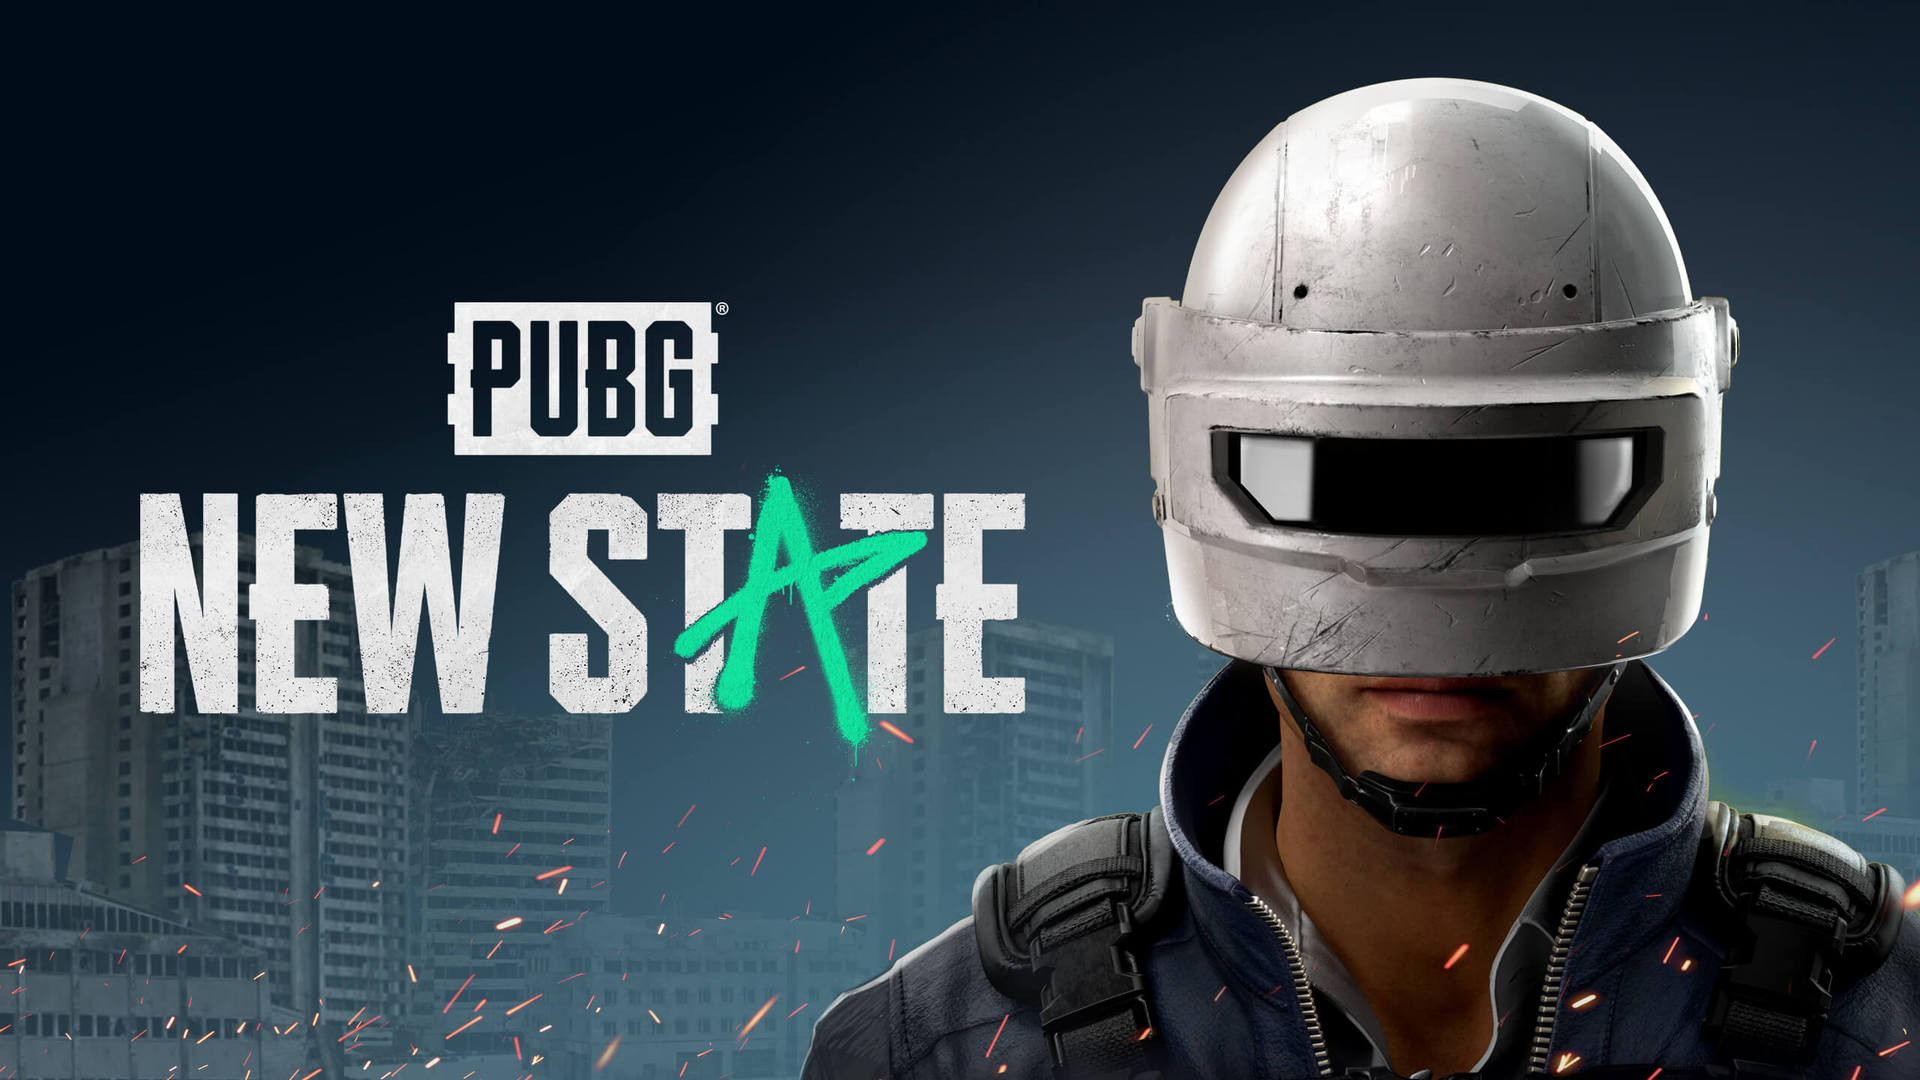 pubg mobile may update: new state has been released.